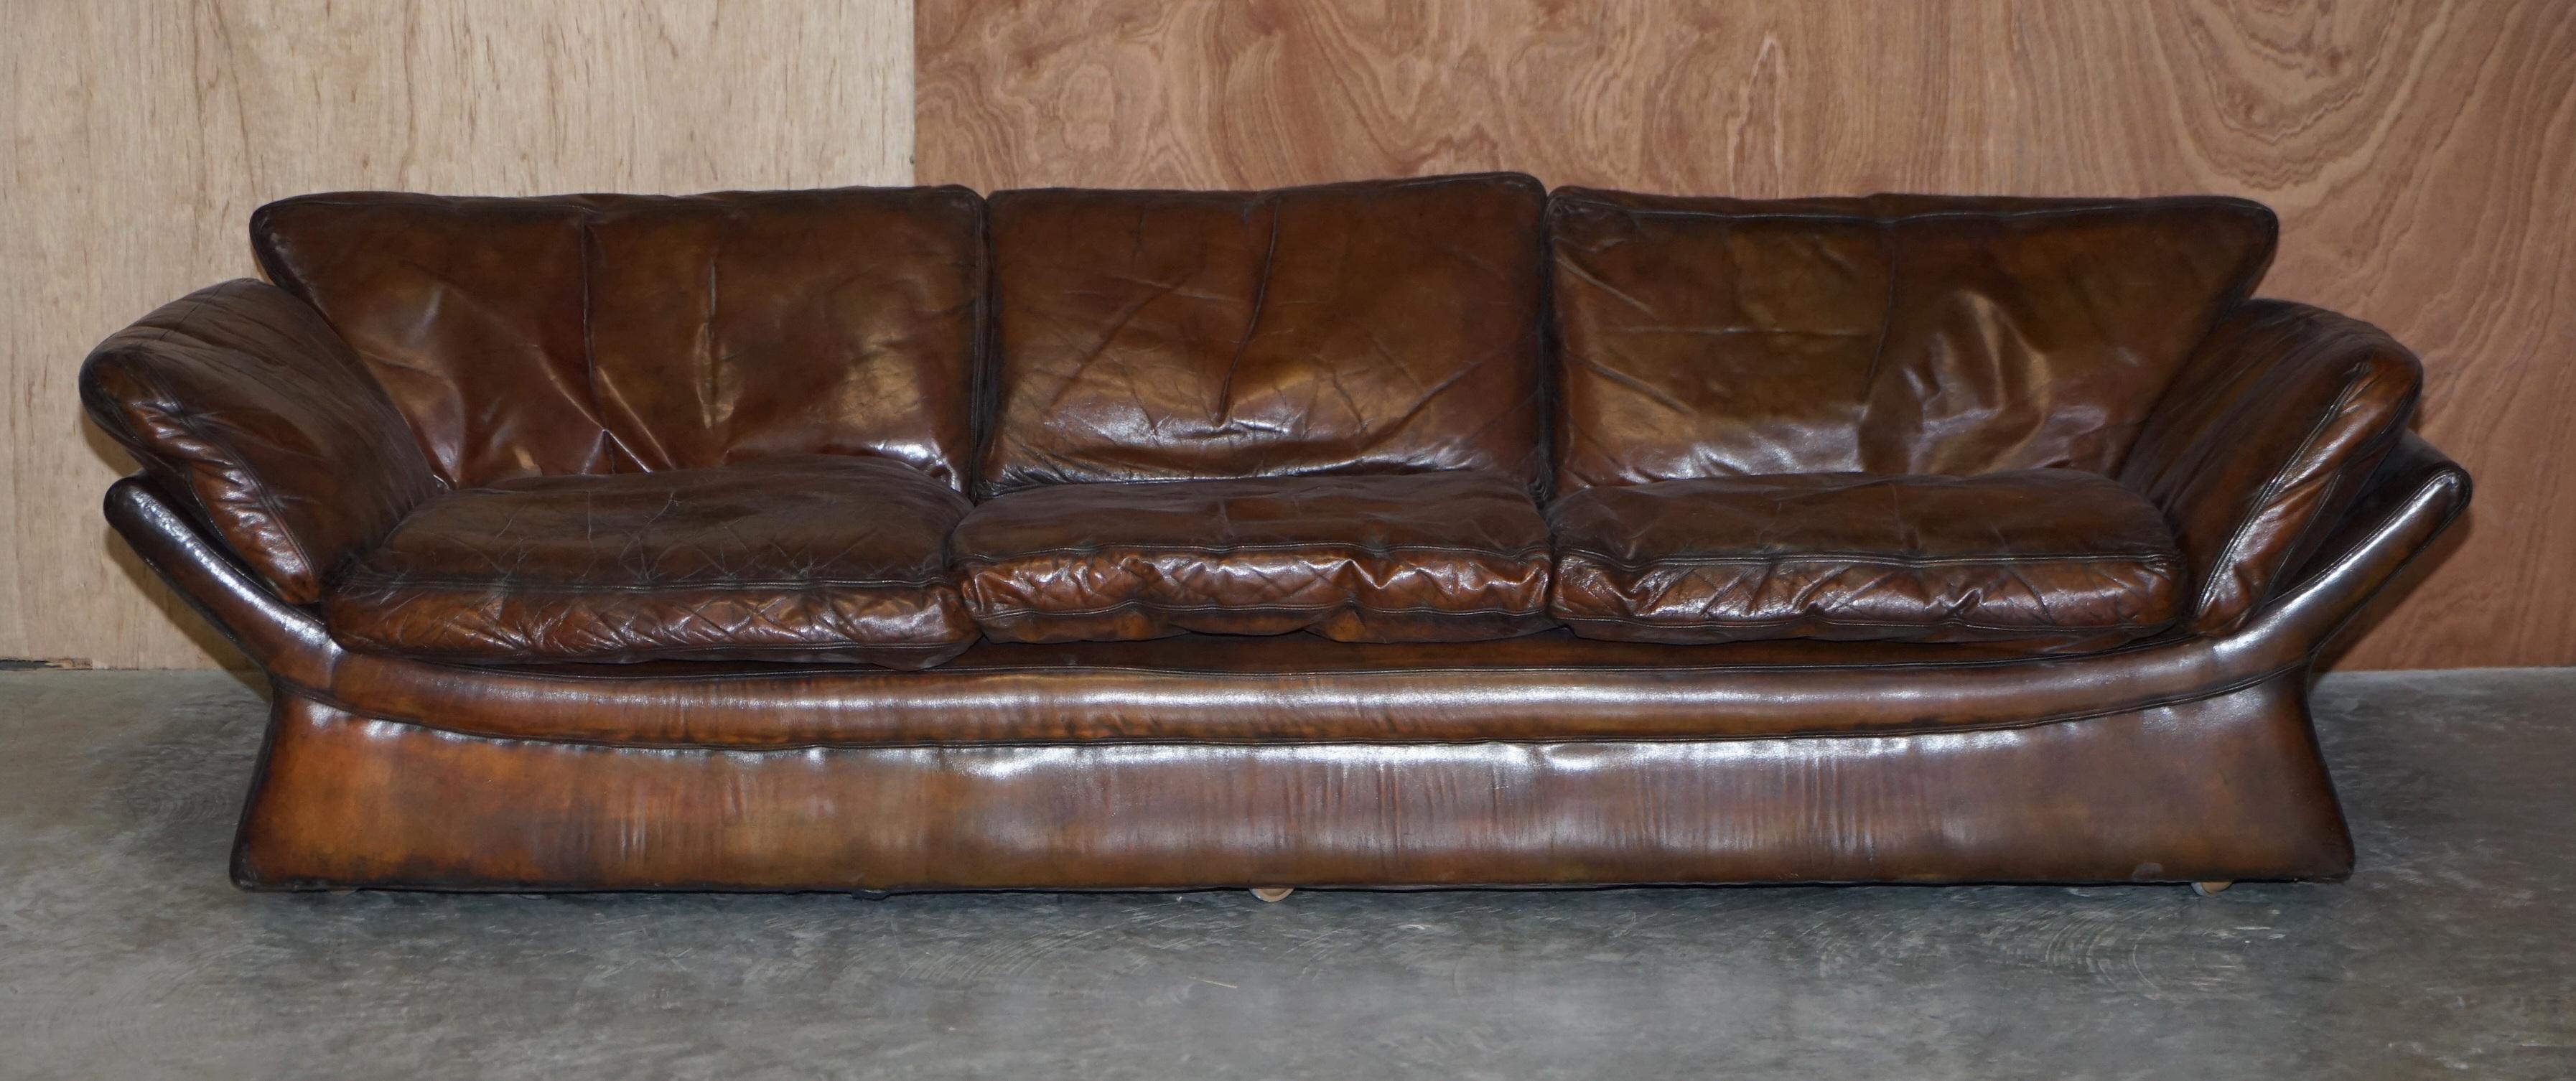 We are delighted to offer for sale this exceptionally rare, super low Mid Century Modern designer restored brown leather sofa

What a sofa! This has to be the coolest sofa I have ever seen in my life, it is so low you are practically sitting on